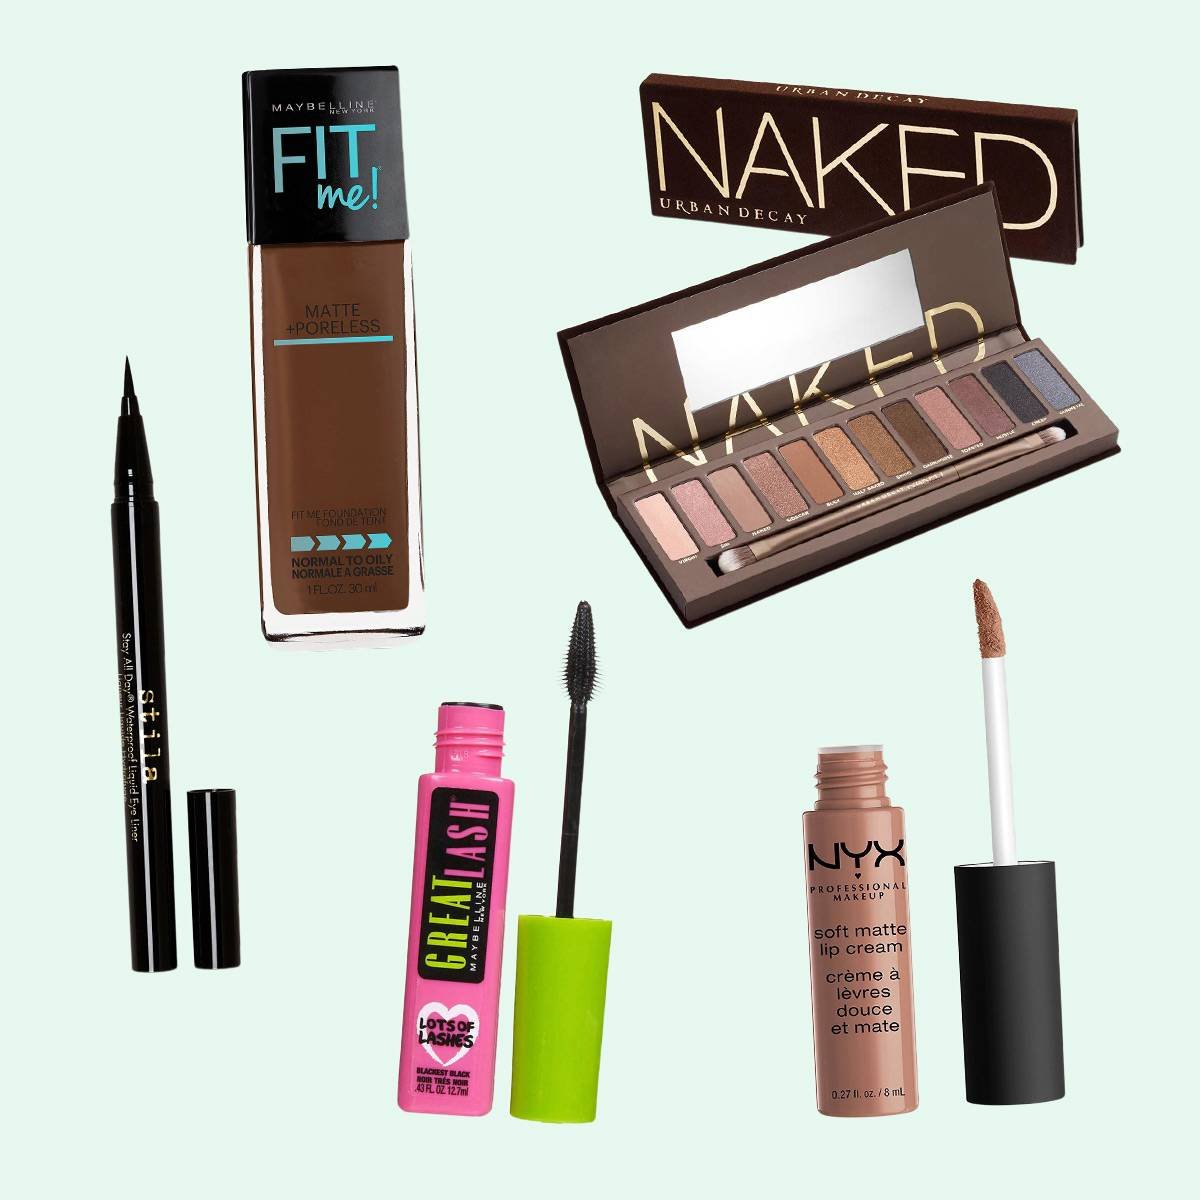 5 Classic Makeup Products Every Makeup Lover Needs to Try